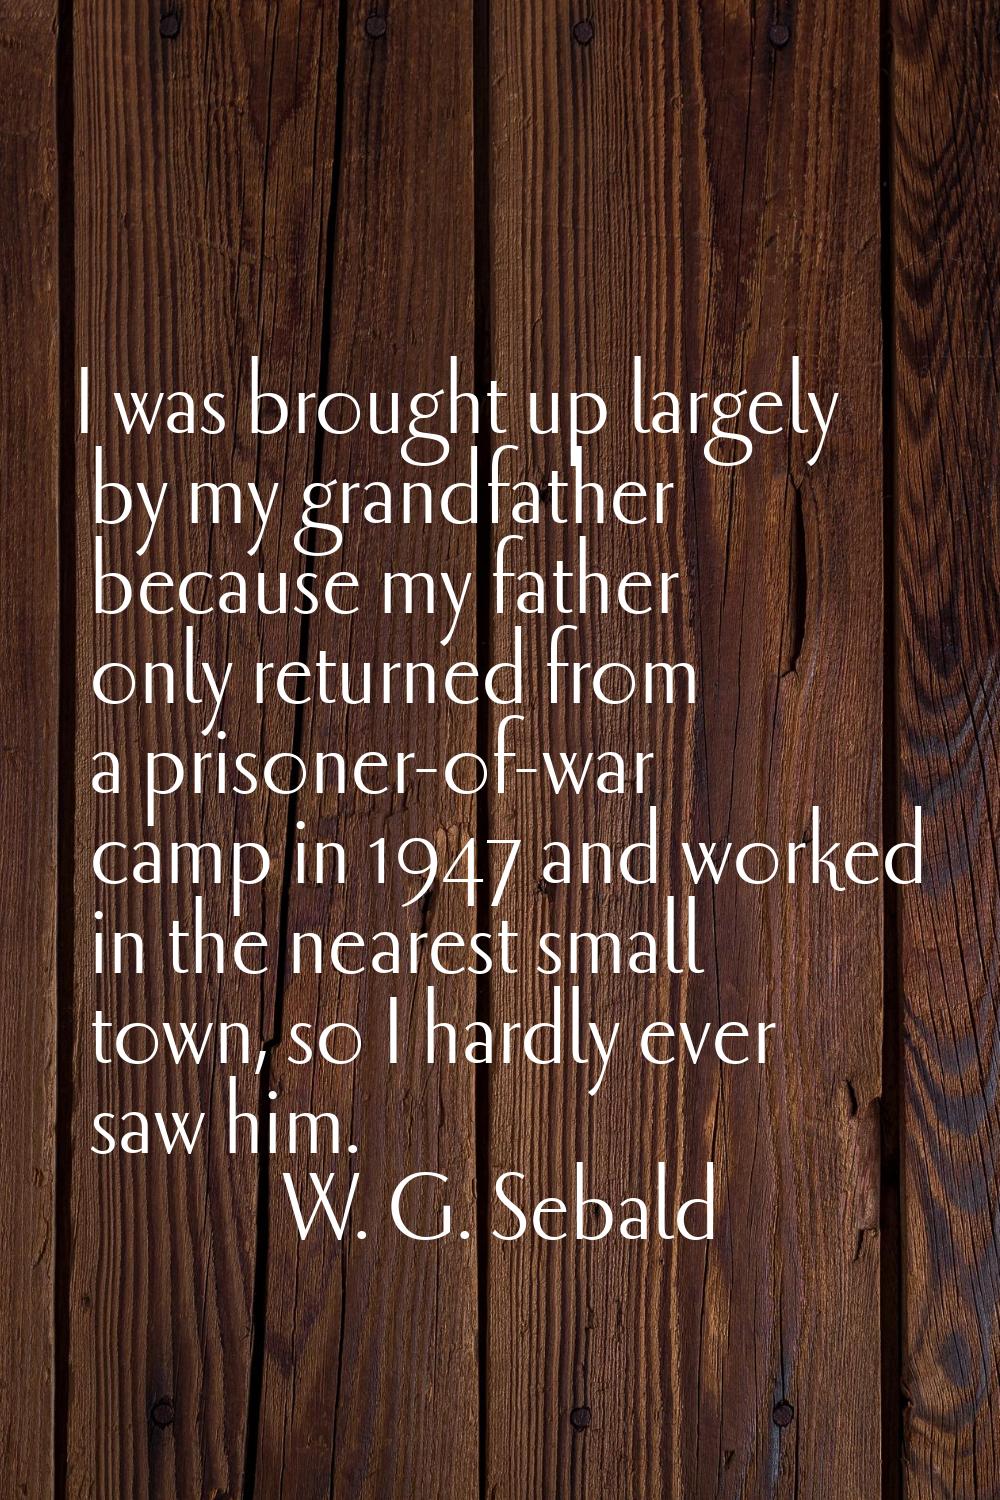 I was brought up largely by my grandfather because my father only returned from a prisoner-of-war c